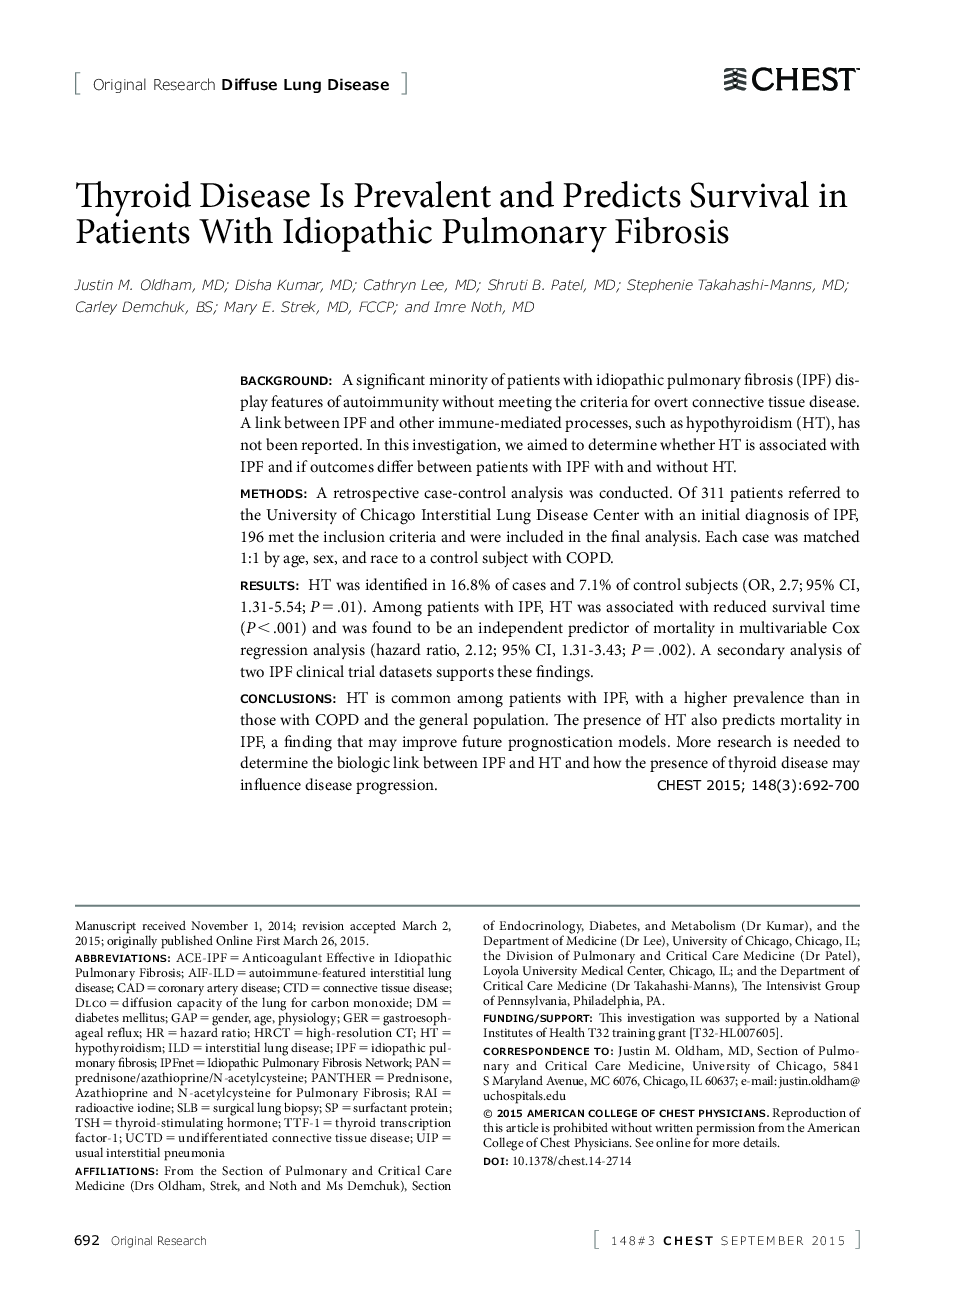 Thyroid Disease Is Prevalent and Predicts Survival in Patients With Idiopathic Pulmonary Fibrosis